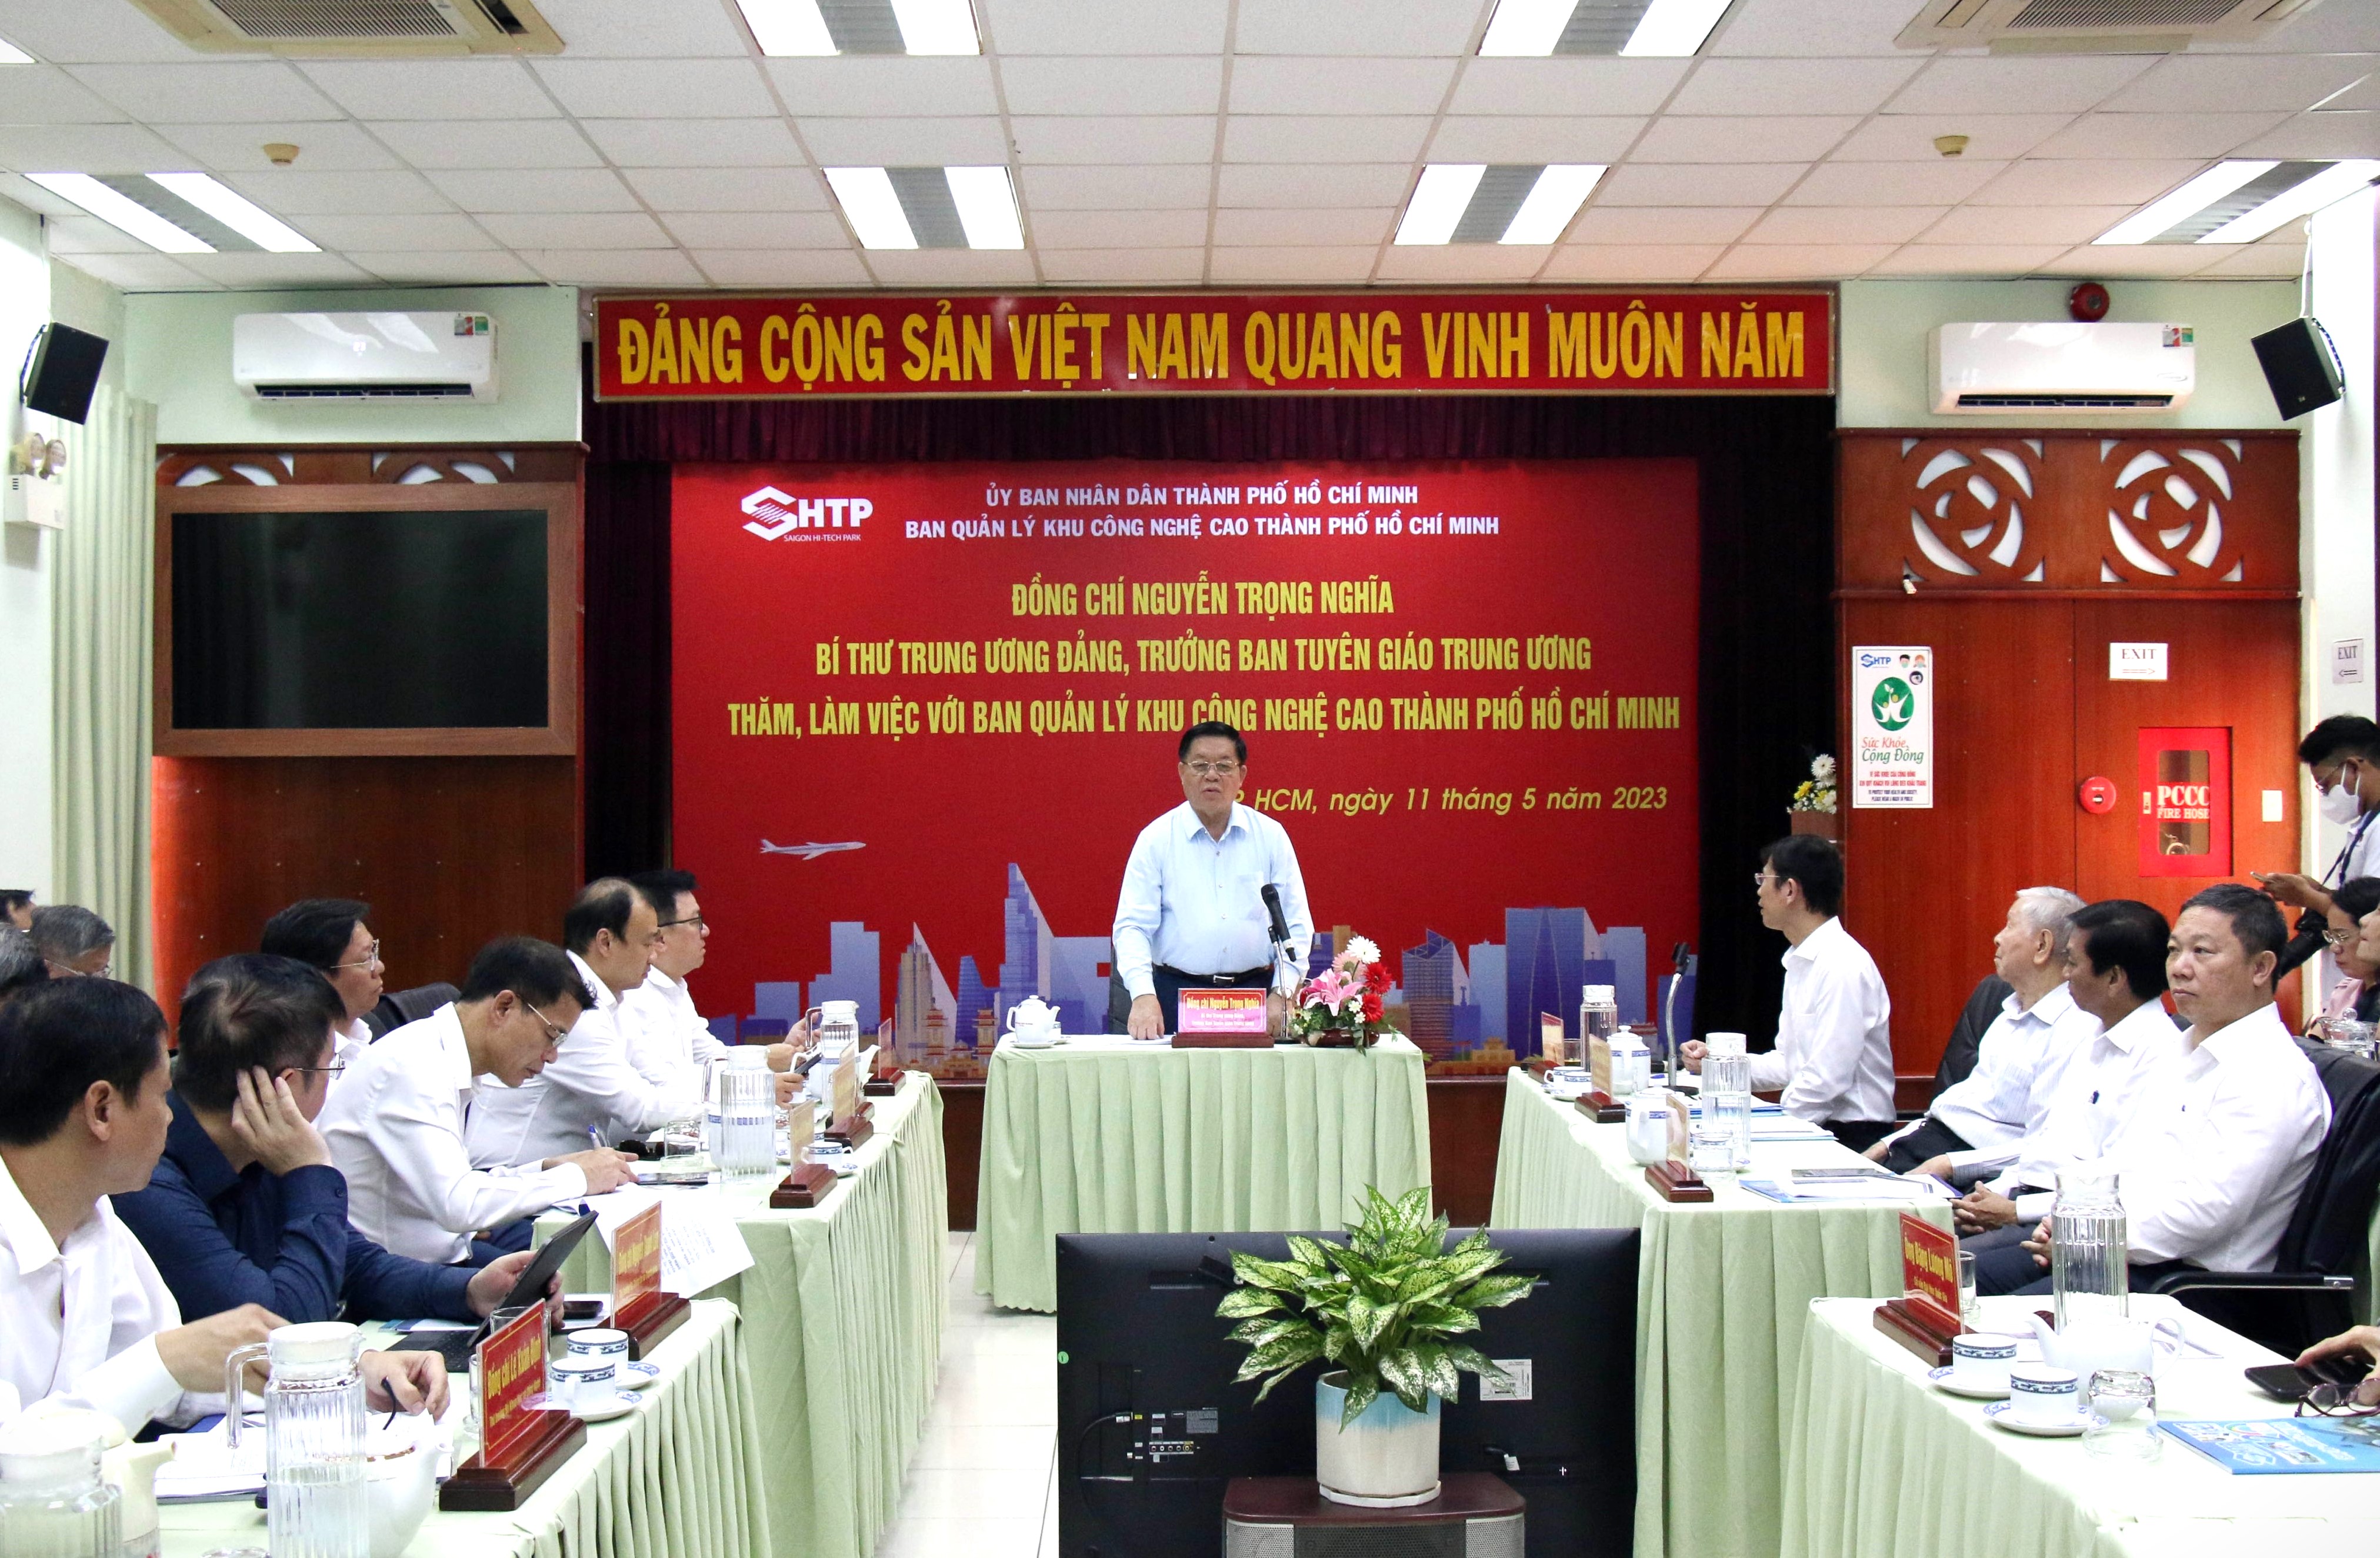 Ho Chi Minh City Hi-Tech Park needs to focus on developing the field of semiconductor and chip